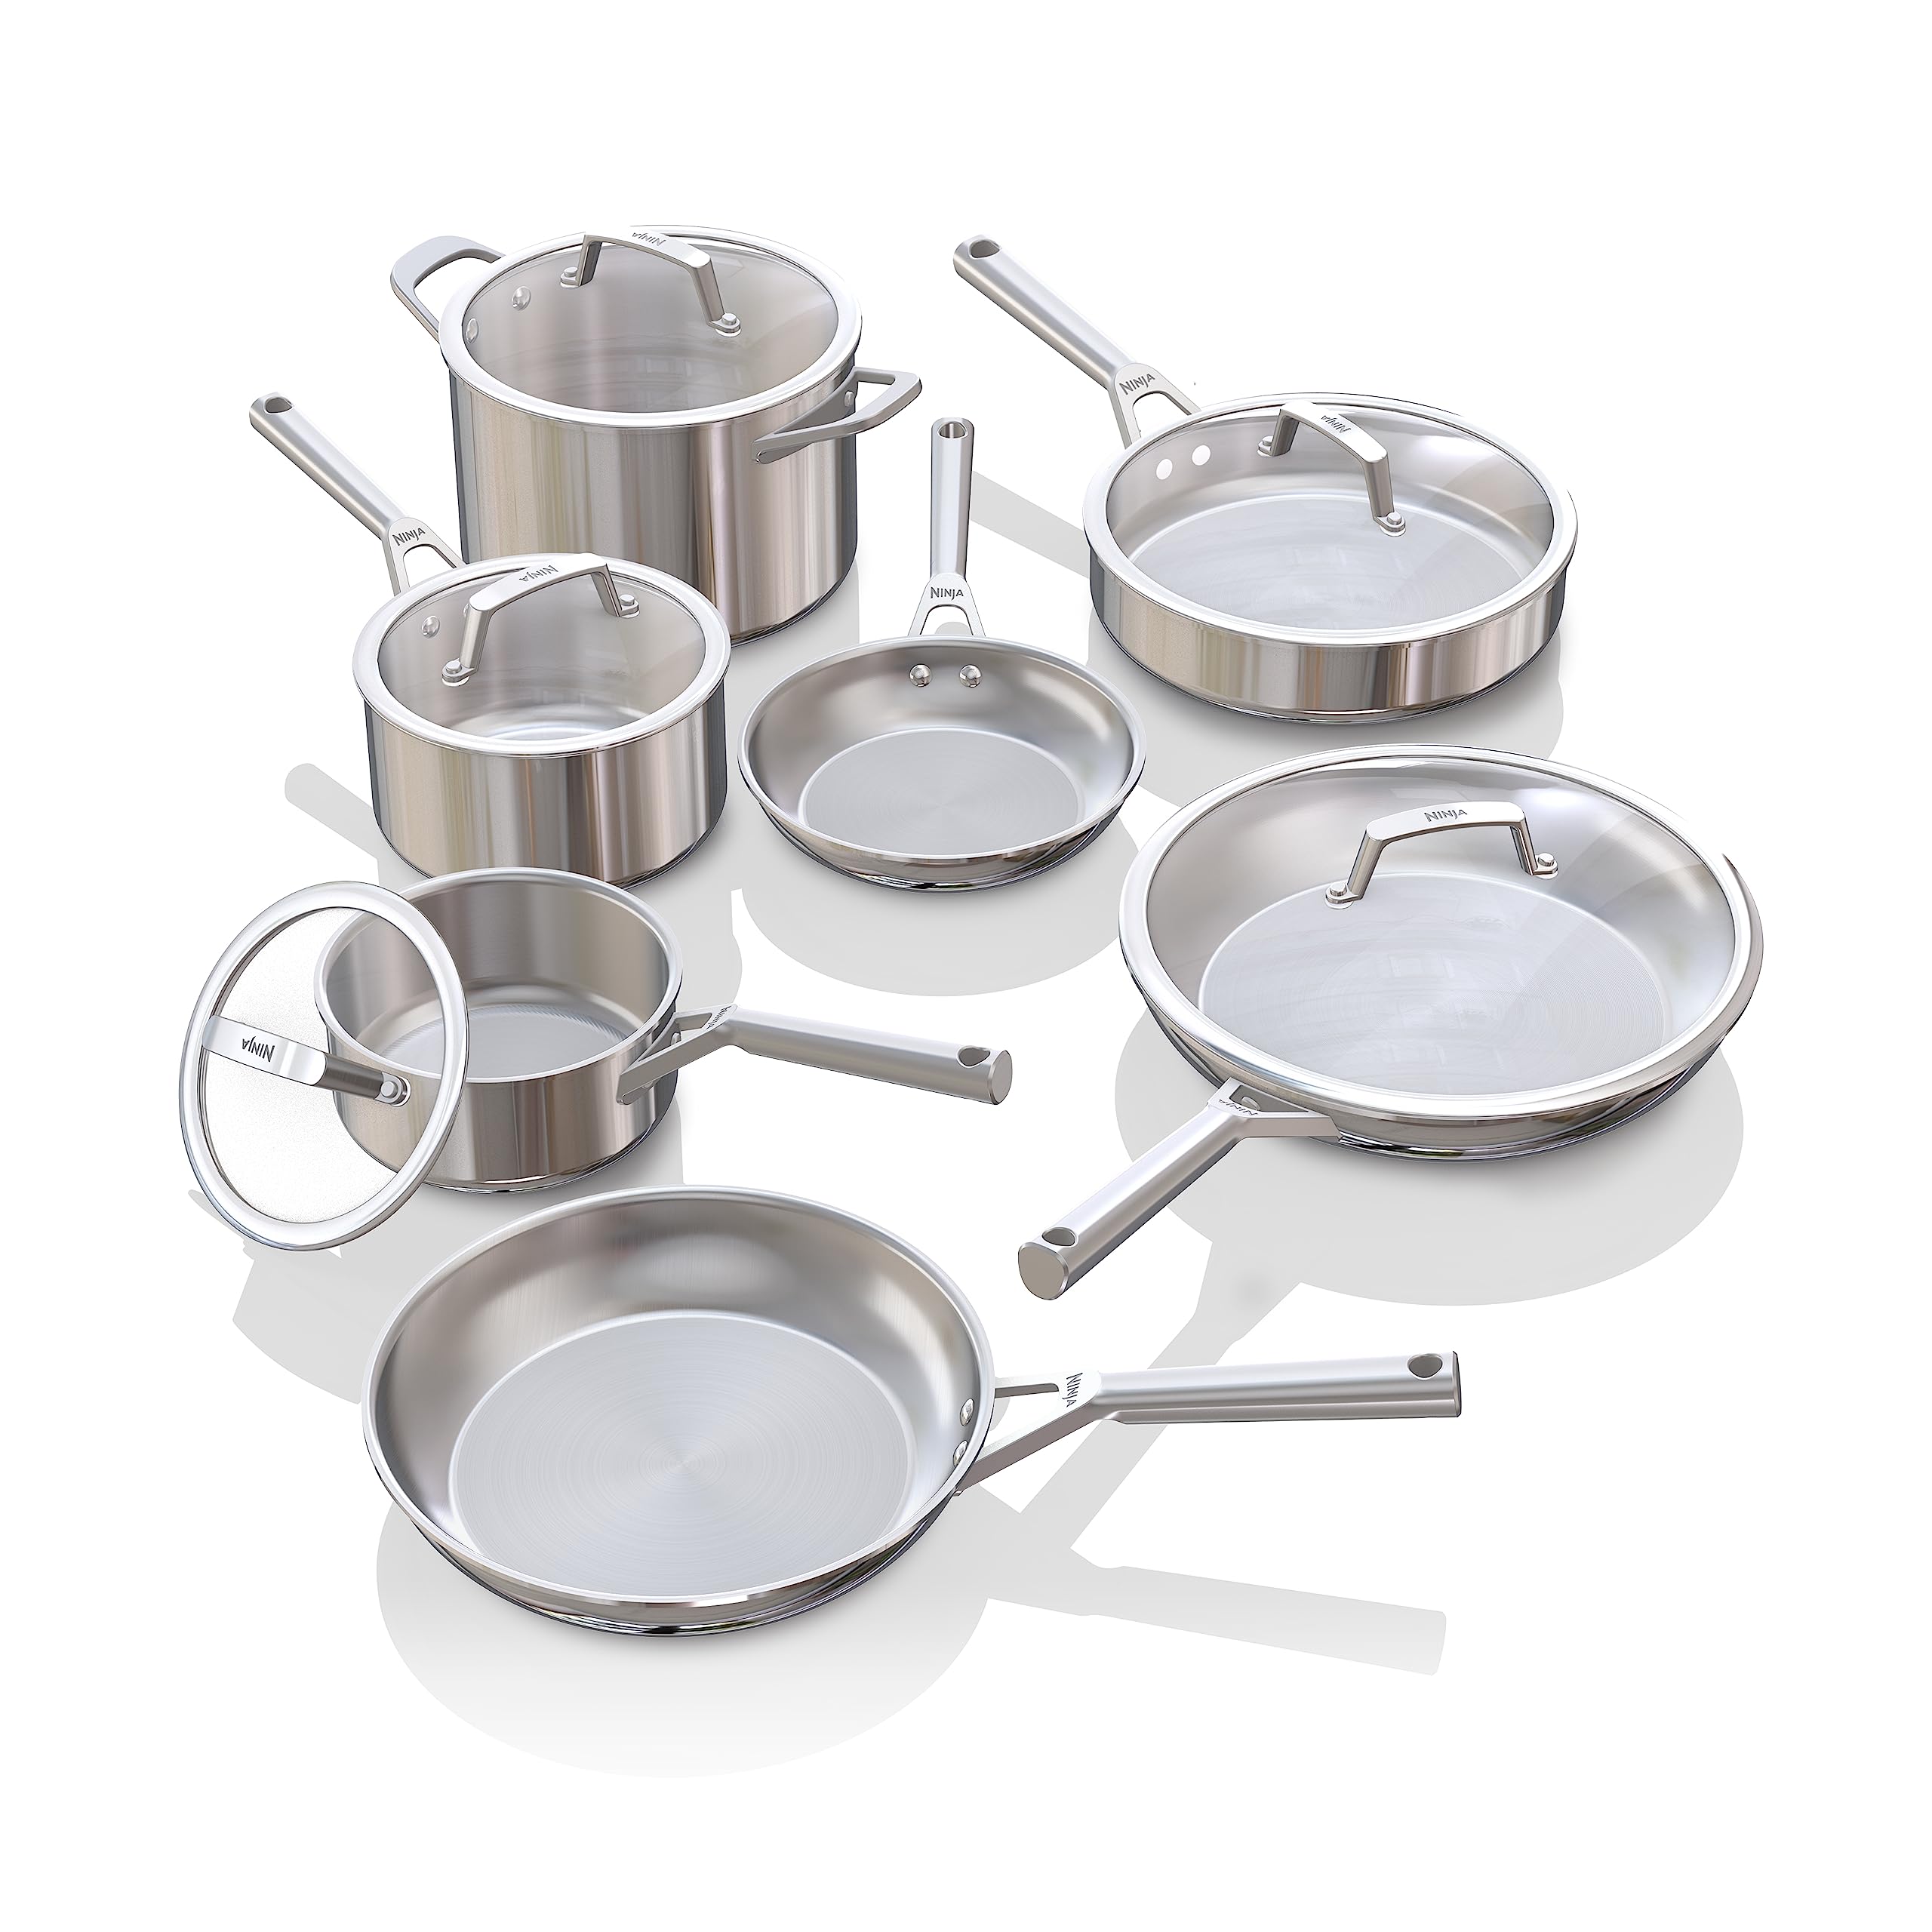 Ninja C99012 EverClad 12-Piece Commercial-Grade Stainless Steel Cookware Set, Tri-Ply Pots And Pans, Oven Safe to 600°F, PFAS Safe, All Stovetops & Induction Compatible, Stainless